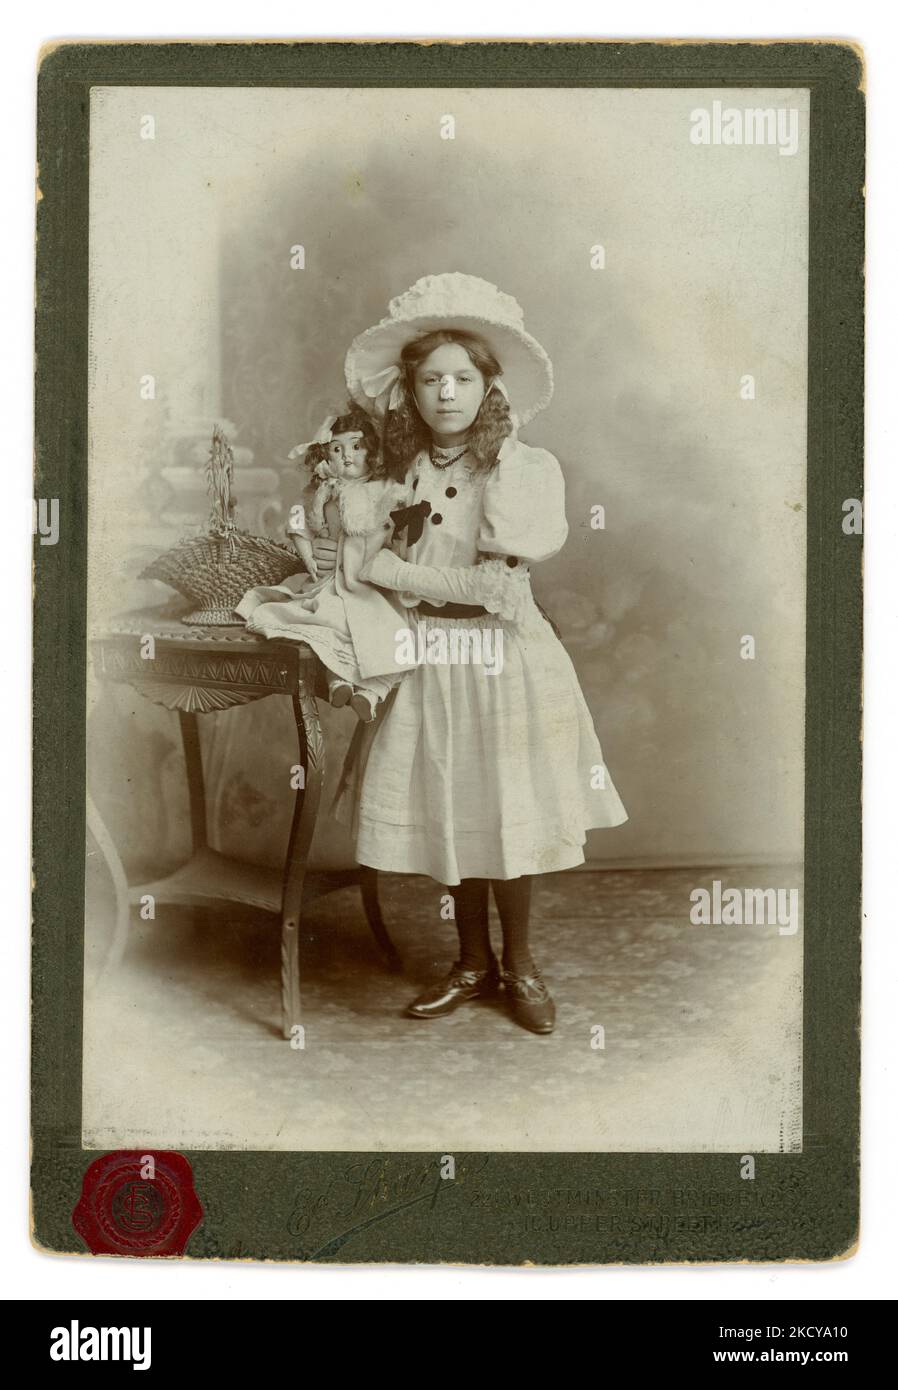 Edwardian era studio portrait cabinet card of pretty looking girl from a privileged, upper / middle class family wearing a large white hat, beautiful white dress (party ?)  with puffed sleeves, white gloves and tights and holding her china doll. Perhaps a birthday photograph. On reverse is written Clara R. J. Whant, aged 11 1909. From the studio of Edward Sharp Islington and Westminster Bridge London, U.K. Dated 1909. Stock Photo